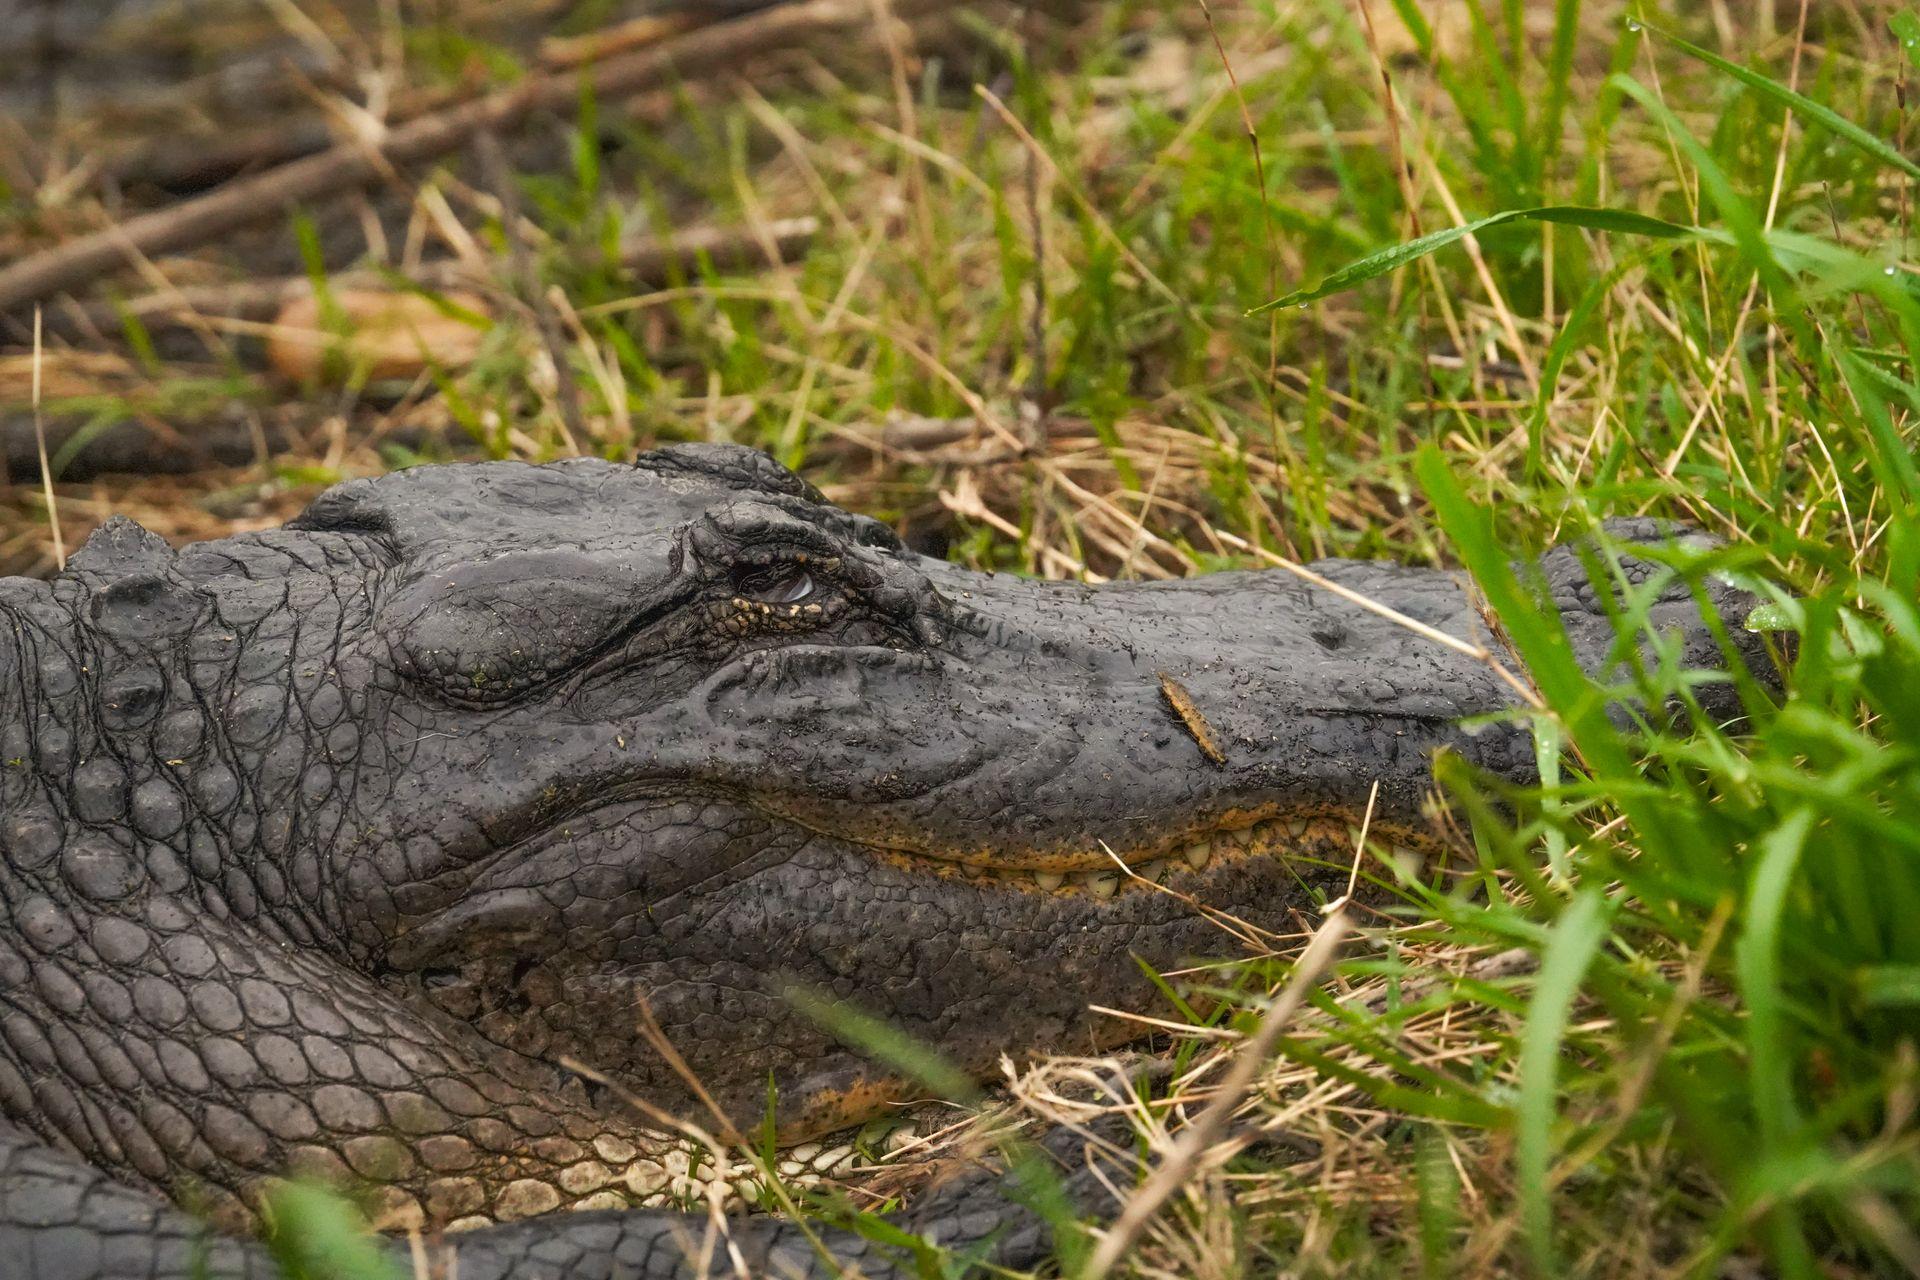 A close up view of an alligator in Brazos Bend